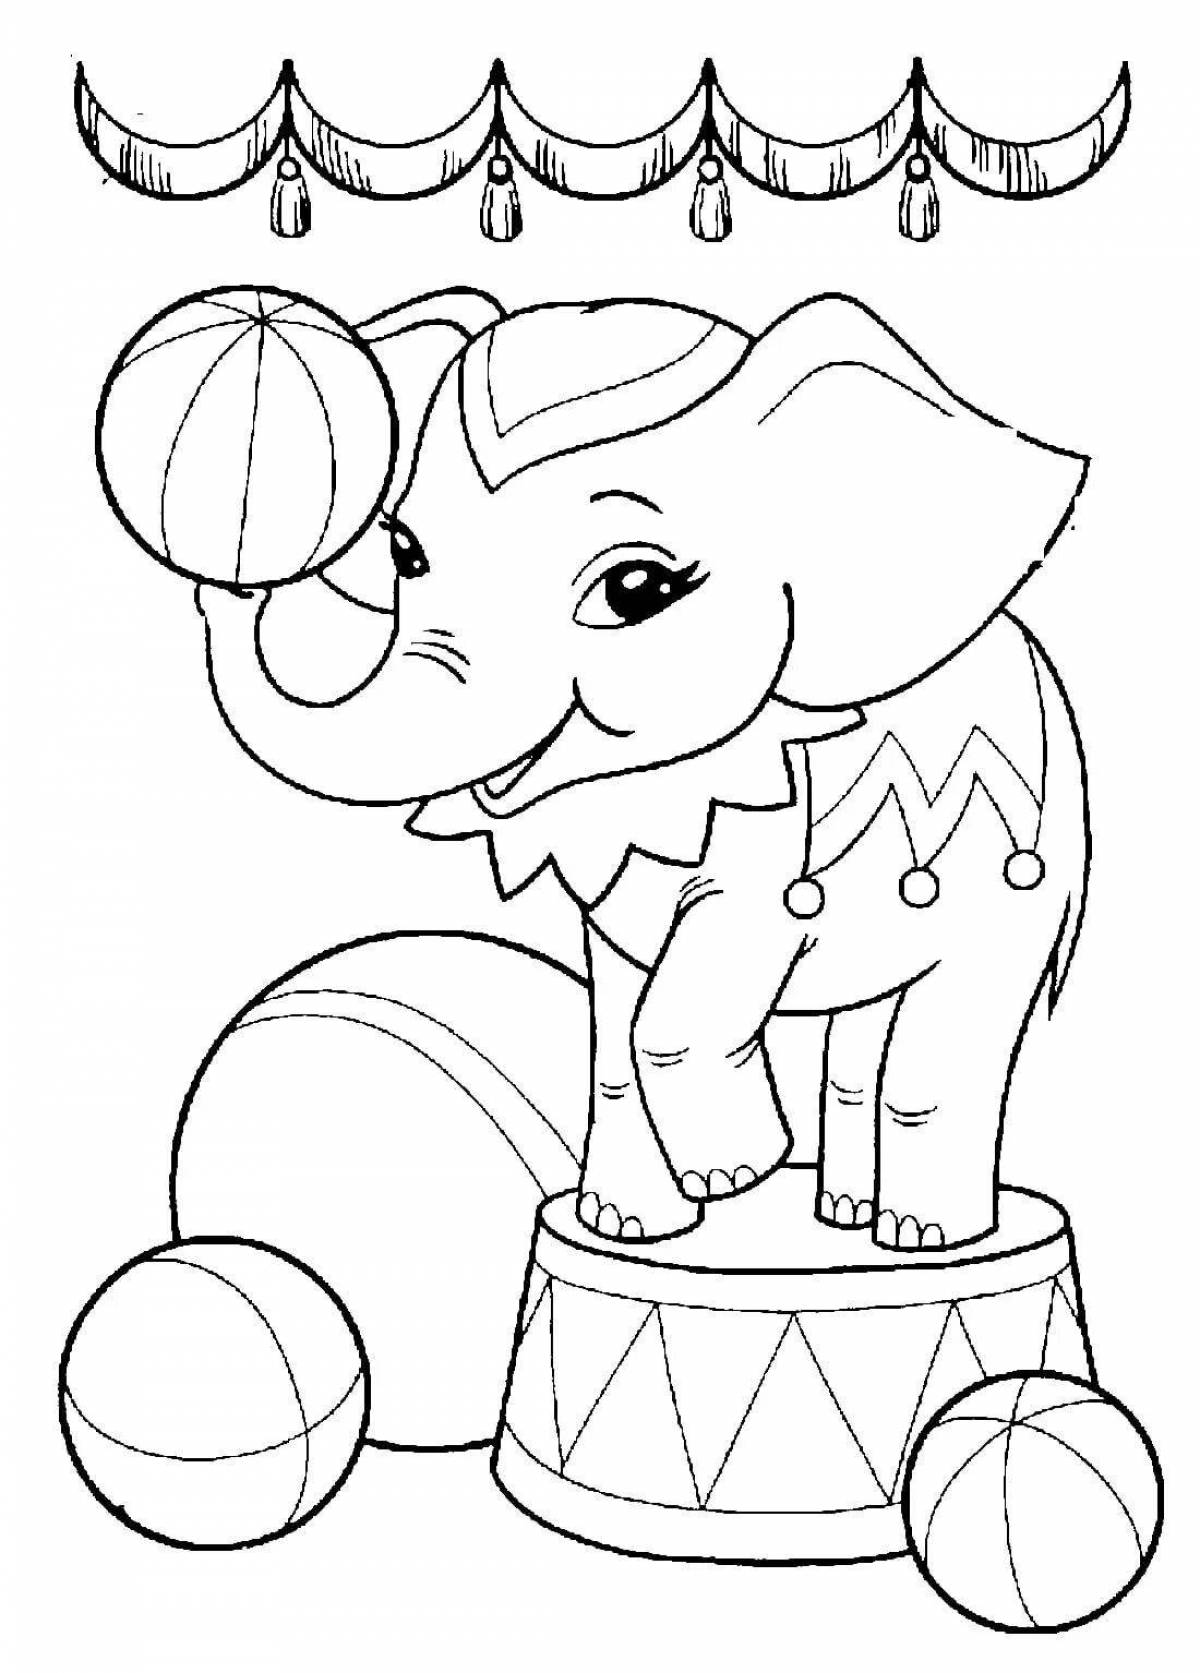 Exciting circus coloring book for little ones